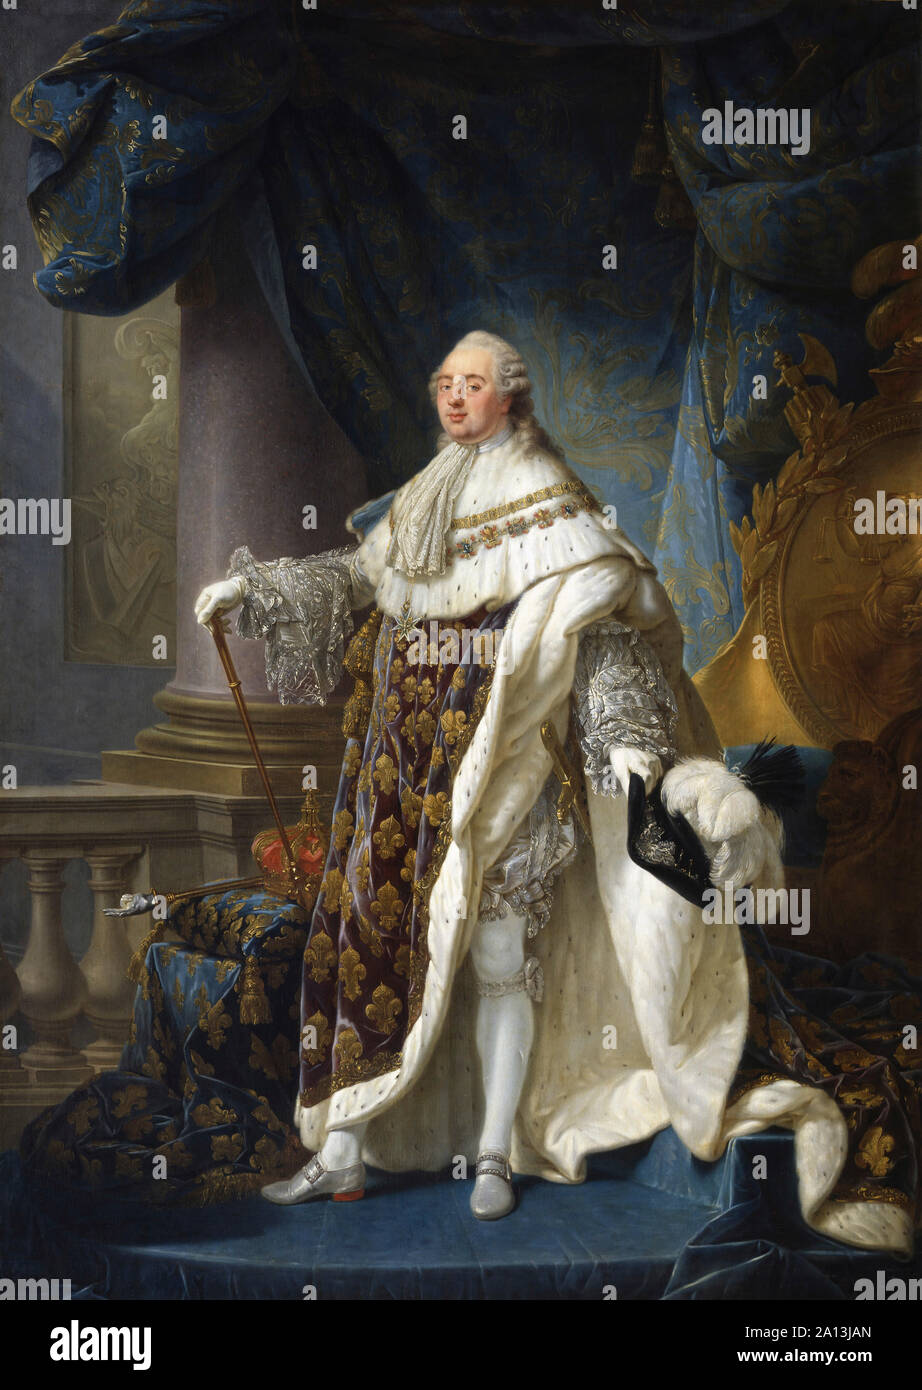 Oil painting portrait of Louis XVI, King of France, dressed in his grand royal attire. Stock Photo